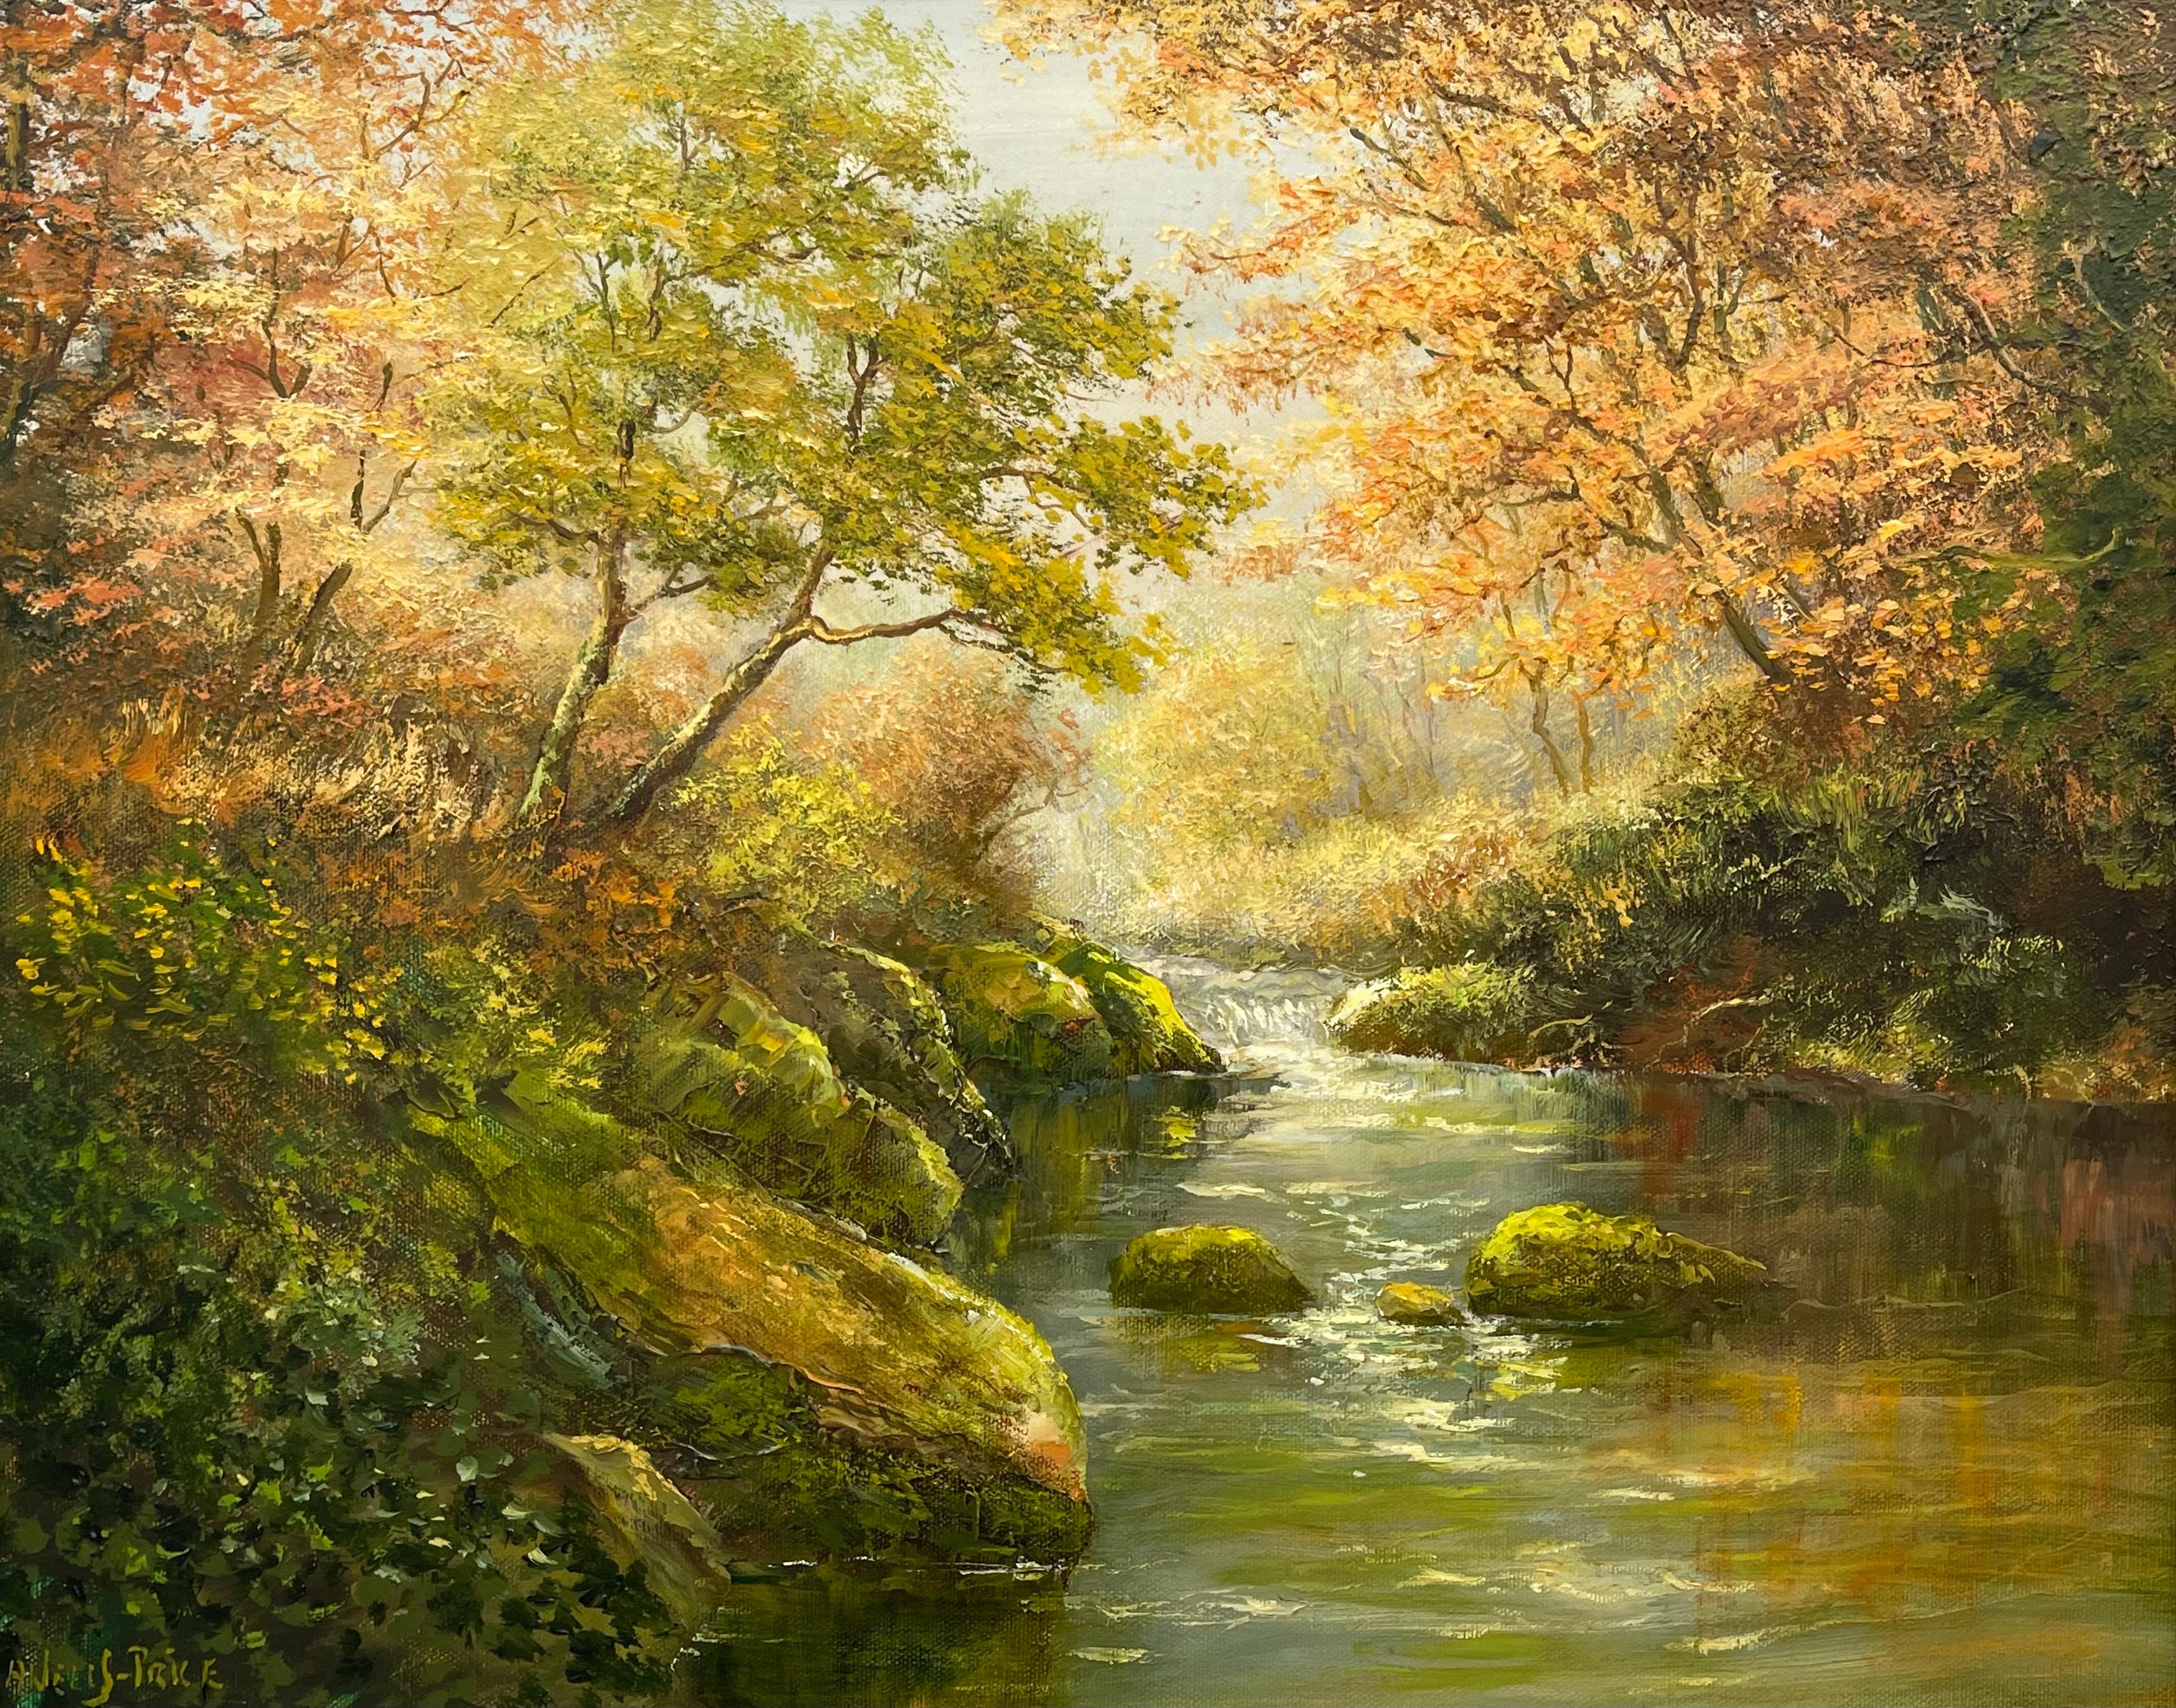 Oil Painting of Beautiful River Landscape Scene in Autumn Sun by British Artist - Brown Landscape Painting by Albert Wells Price